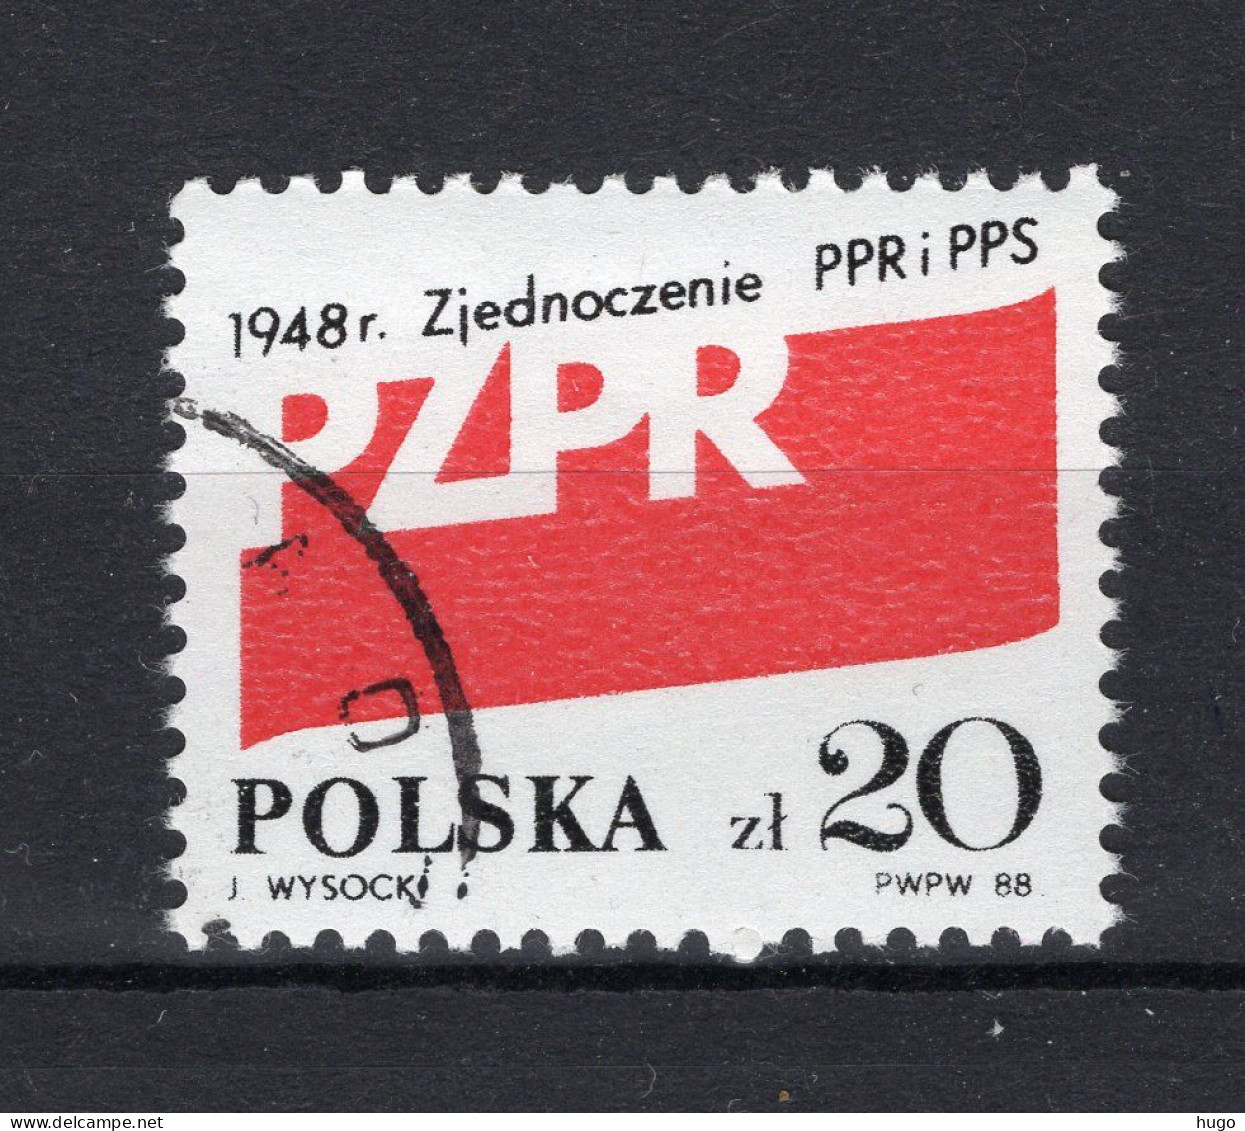 POLEN Yt. 2990° Gestempeld 1988 - Used Stamps